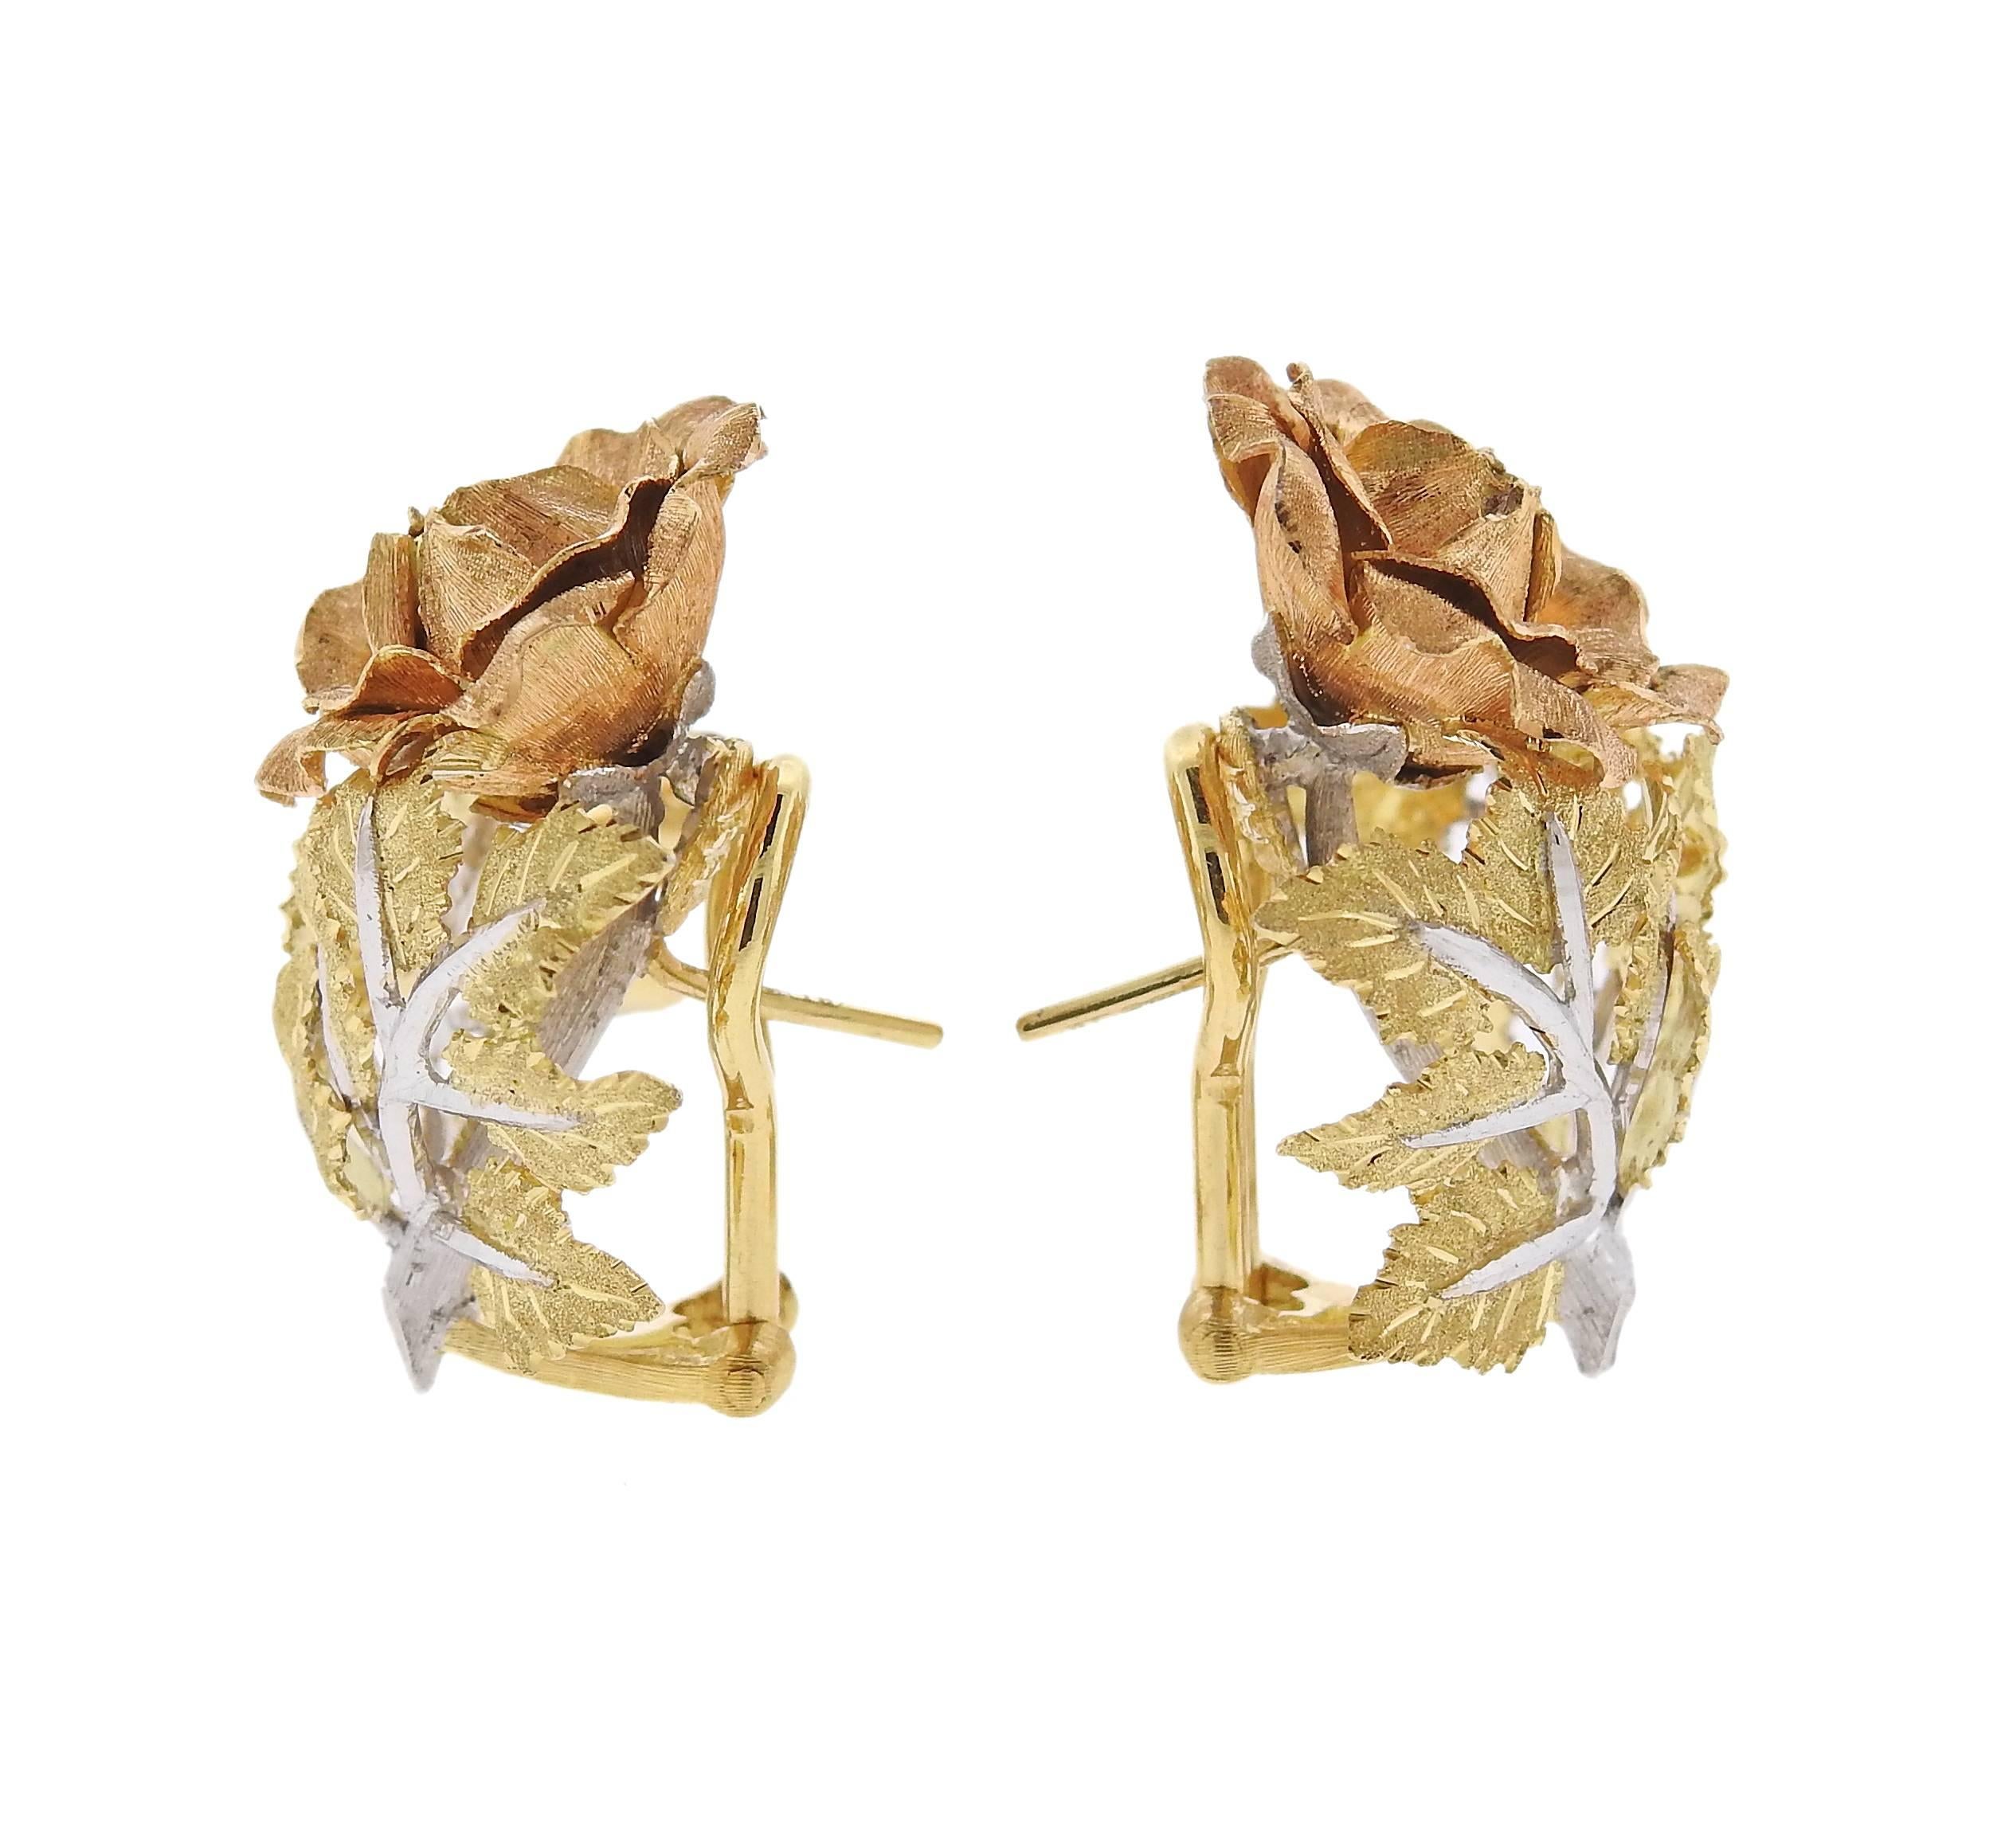 A pair of 18k tri color earrings, crafted by Buccellati, featuring rose flower bush.  Earrings are 25mm x 21mm.  Marked: D5154, Buccellati, Italy, 18k. Weight  - 14.6 grams.
With pouch. Retail $13900. 